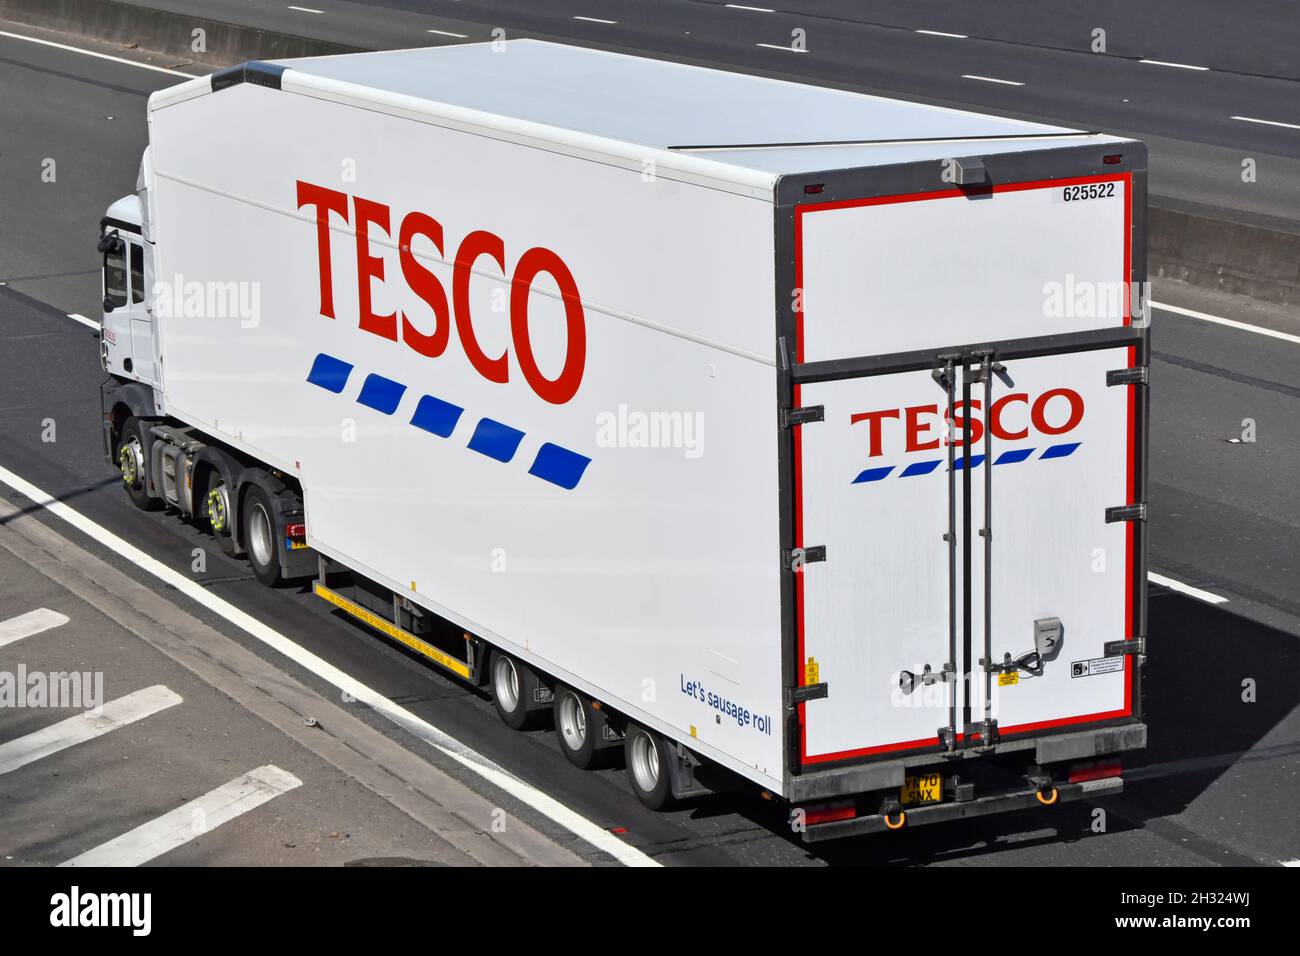 Side & back view Tesco supermarket hgv food supply chain juggernaut lorry truck & articulated trailer advertising business brand name logo UK motorway Stock Photo